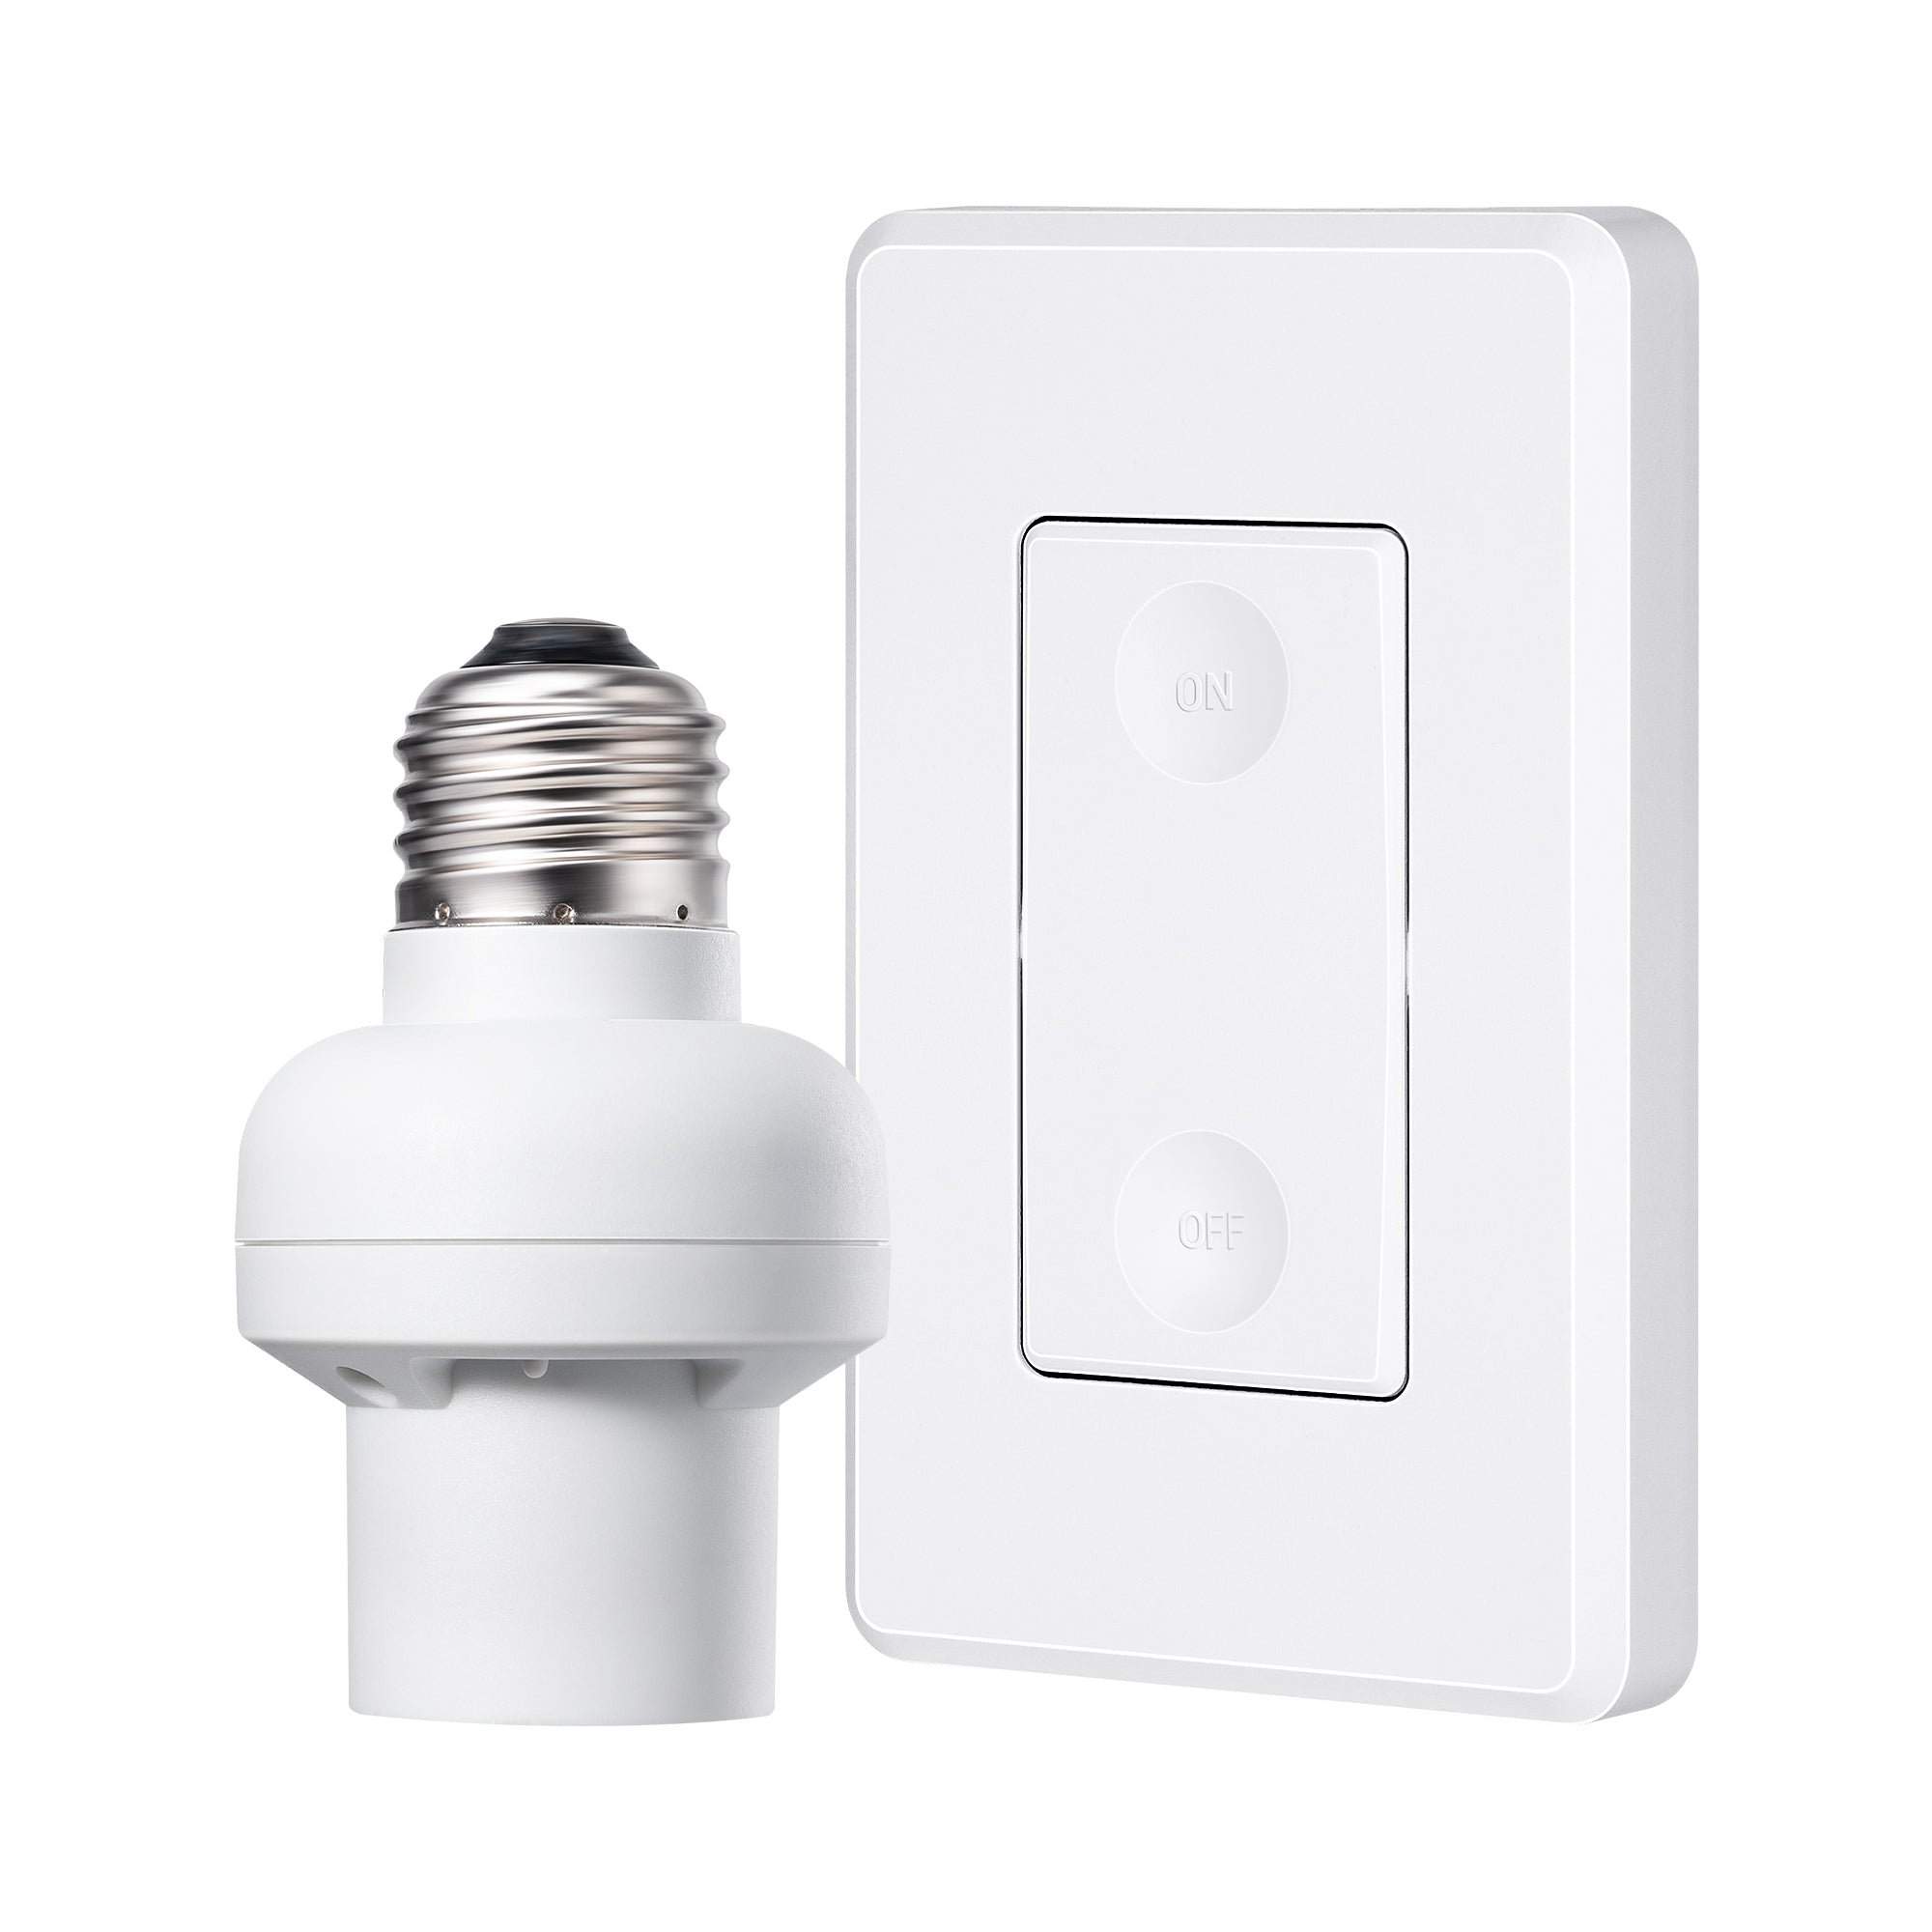 DEWENWILS Remote Control Light Socket, Wireless Light Switch for Pull Chain  Light Lamp Fixtures, 100FT Range, No Wiring Needed, ETL Listed(1 Wall